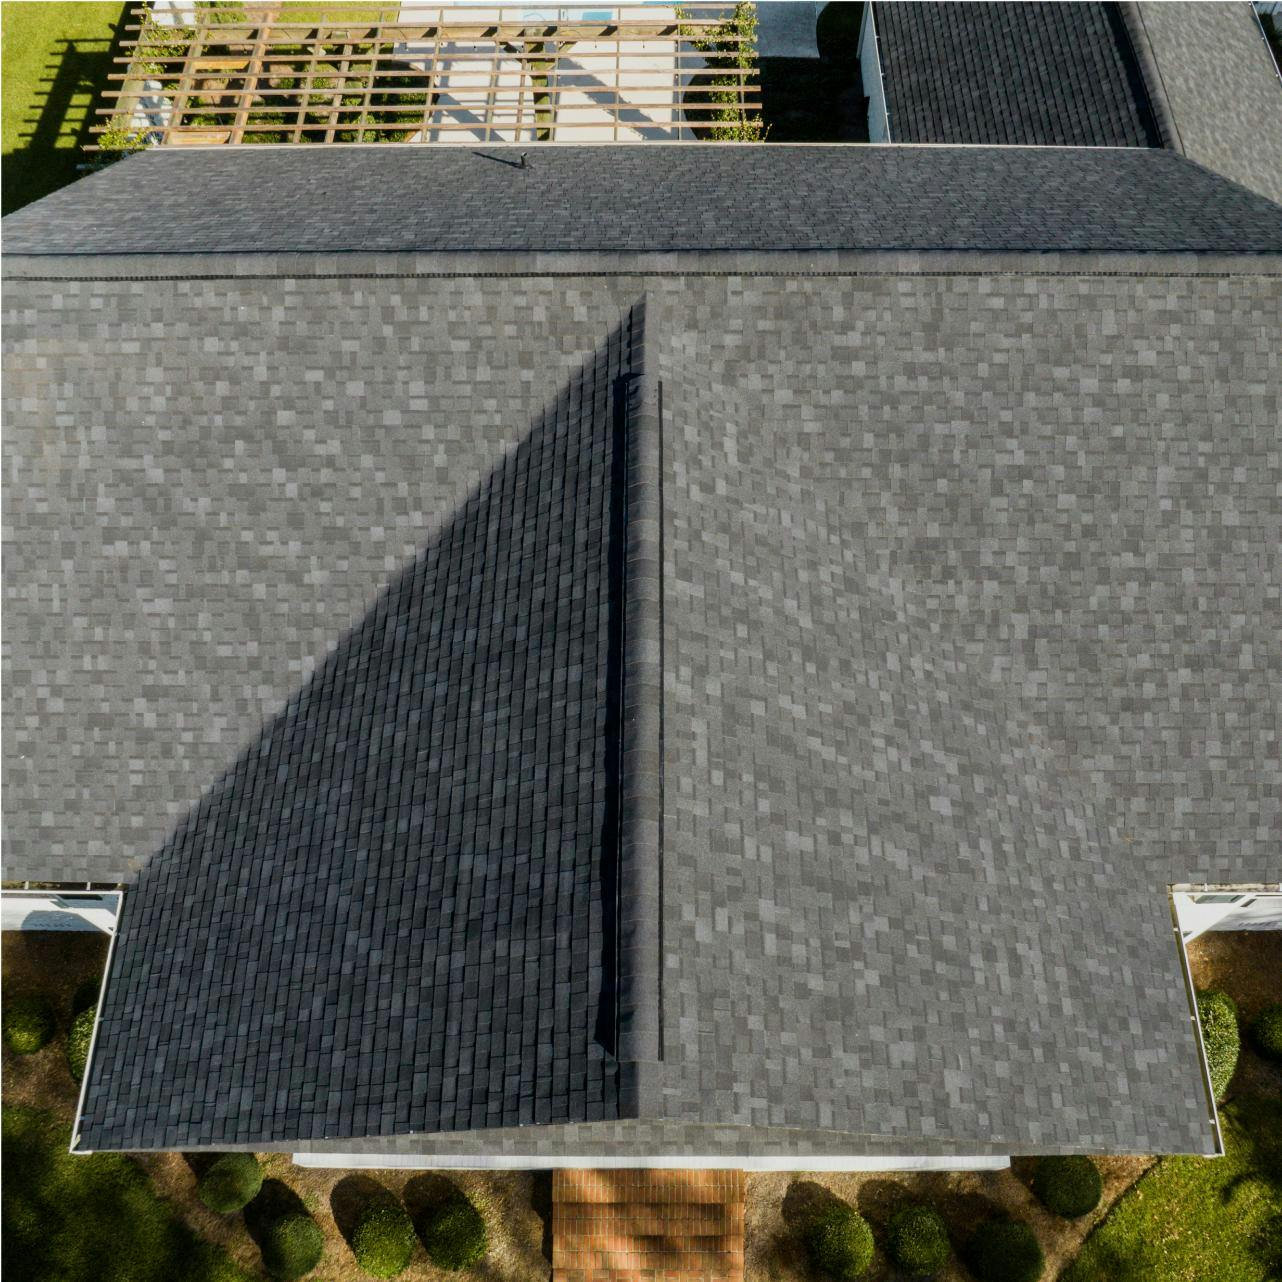 Architectural Asphalt Shingles | Onyx Black | Evans County Residental Roofers | Residential Roofing